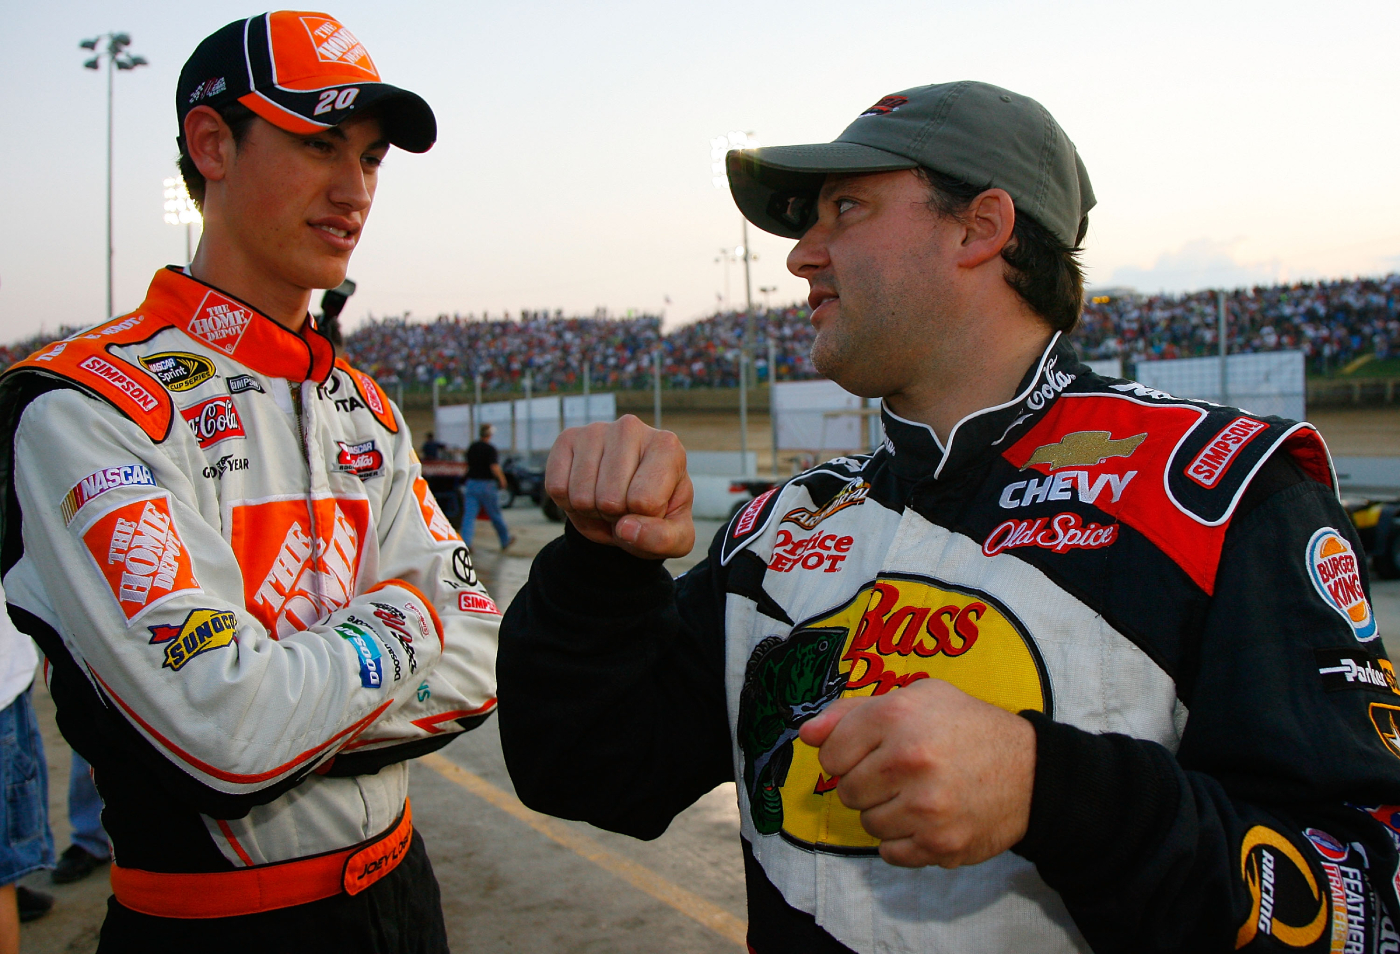 Tony Stewart Once Called Joey Logano a ‘Little Rich Kid Who Has Never Had To Work in His Life’